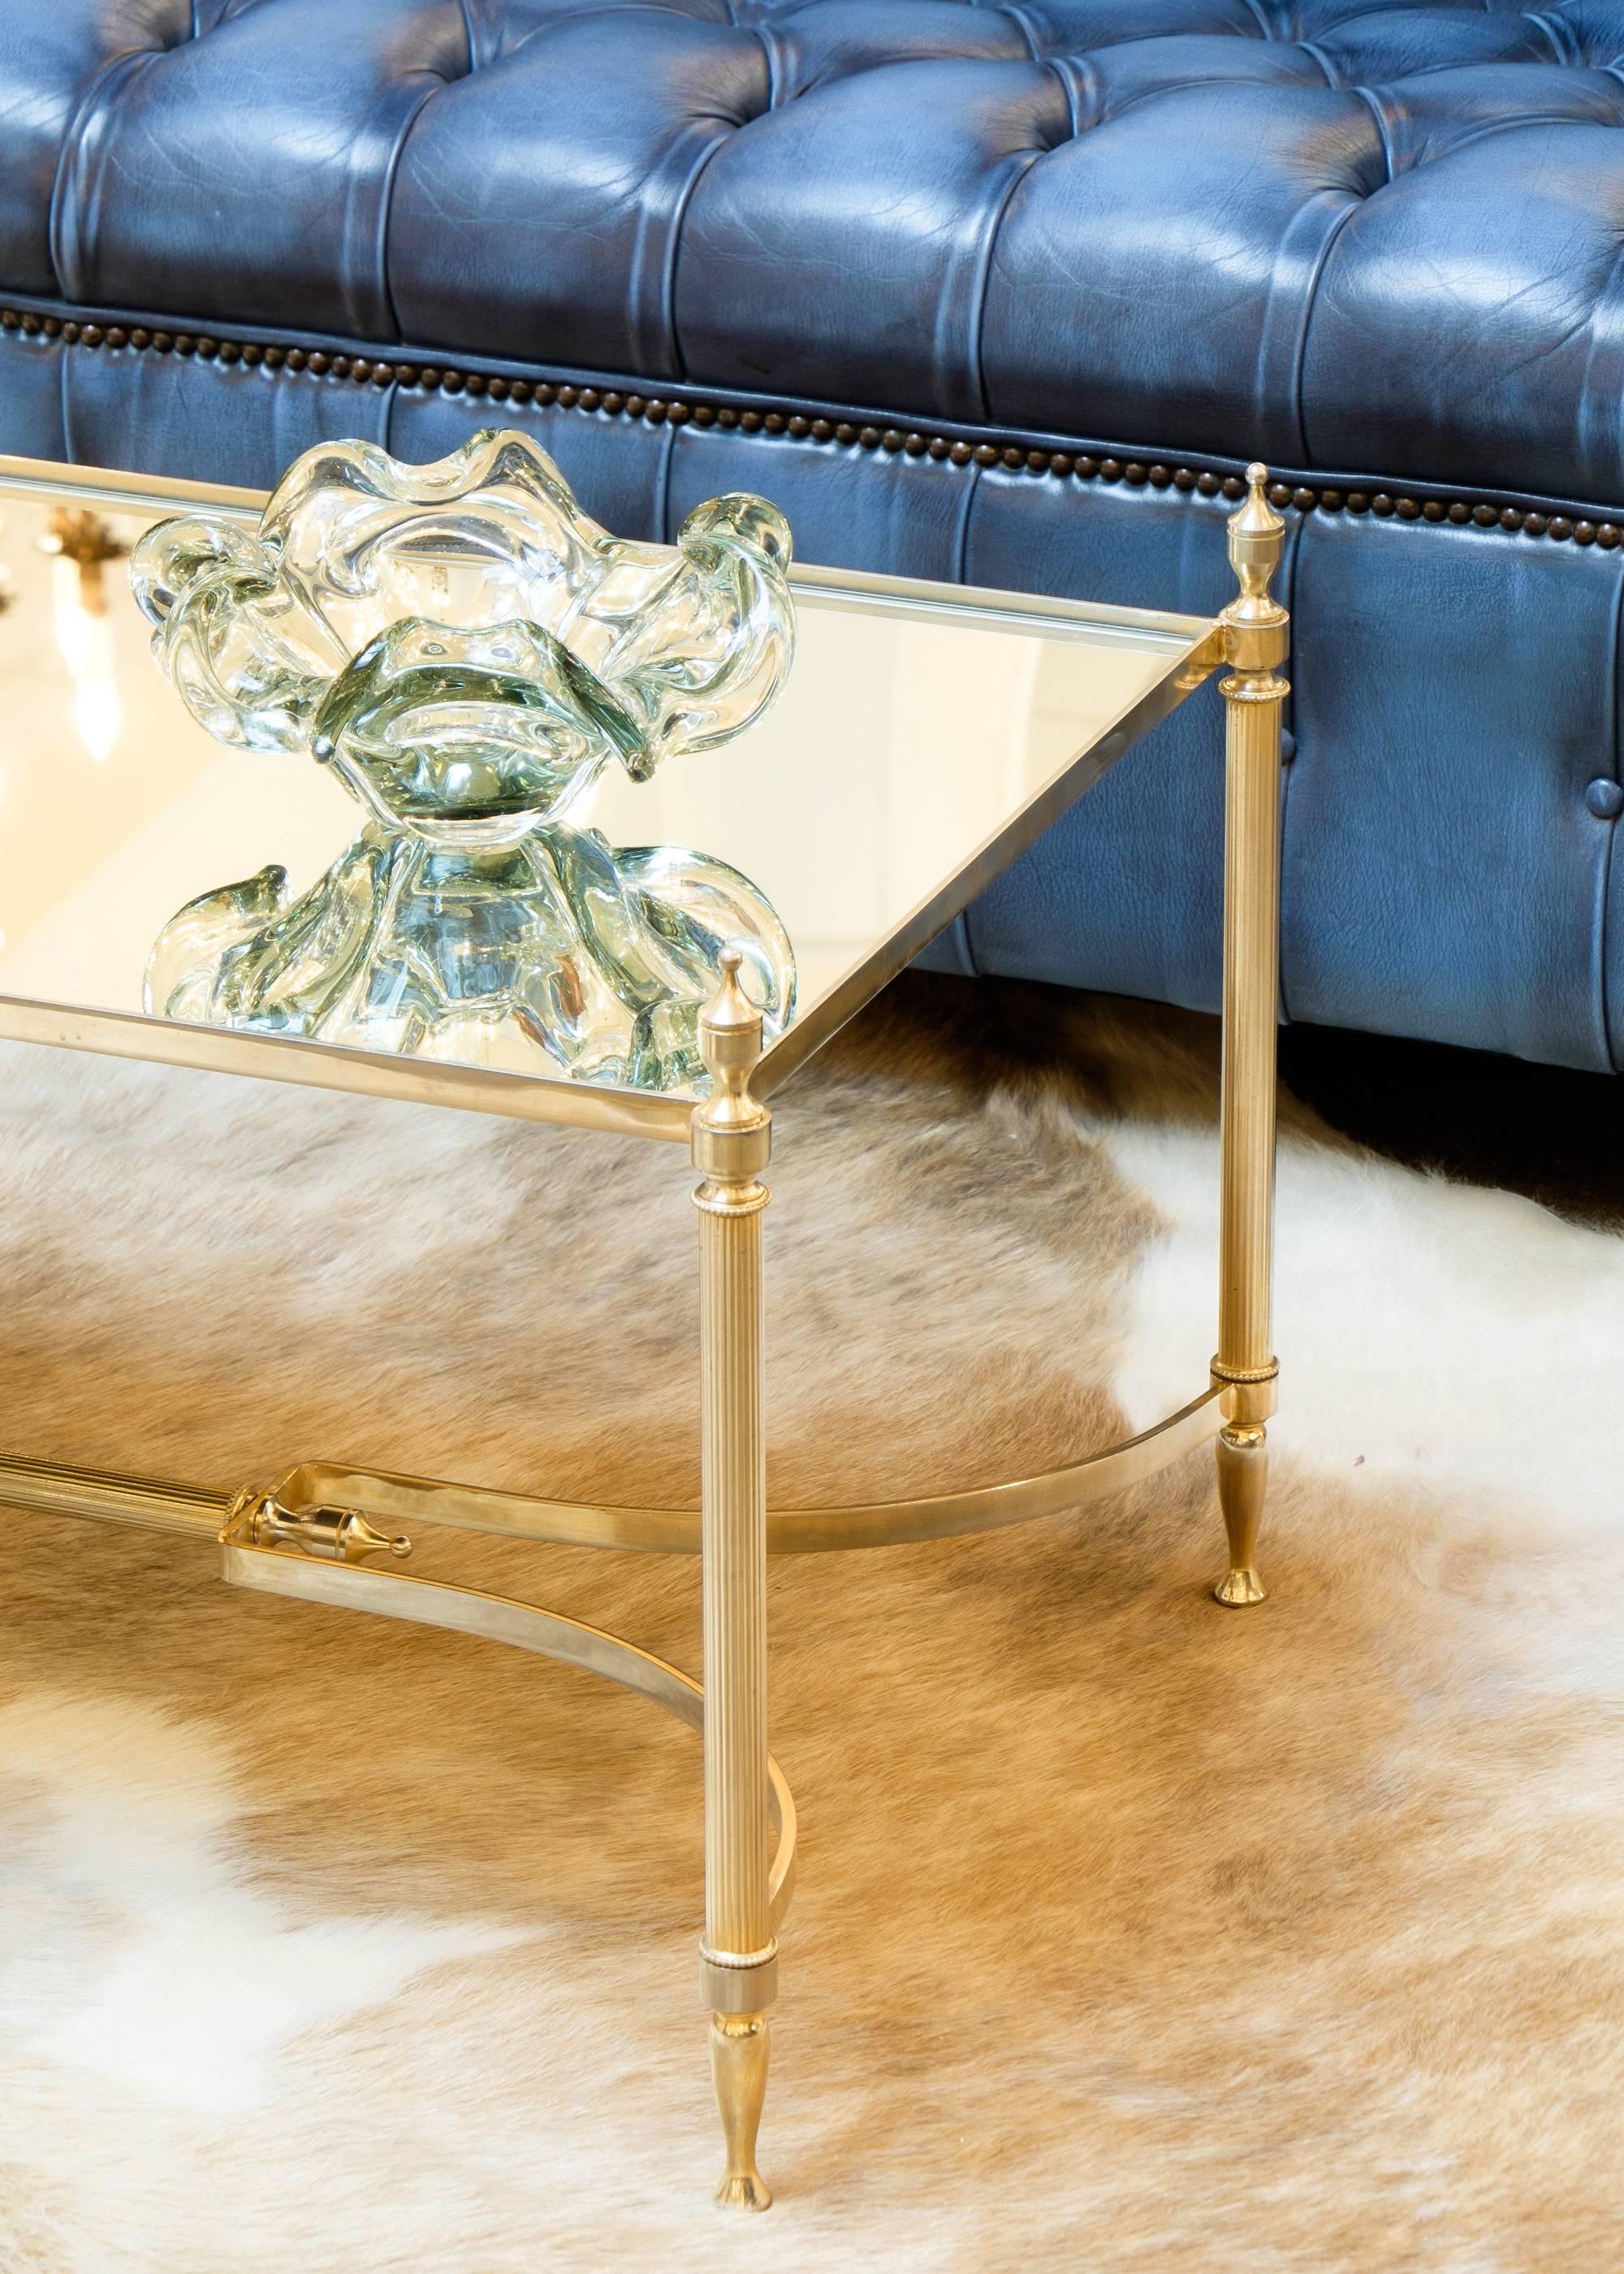 French vintage cocktail table in brass with a mirrored glass top. We adore the neoclassic flair with stylized finials, fluted legs, and arched stretcher. A refined and elegant piece.